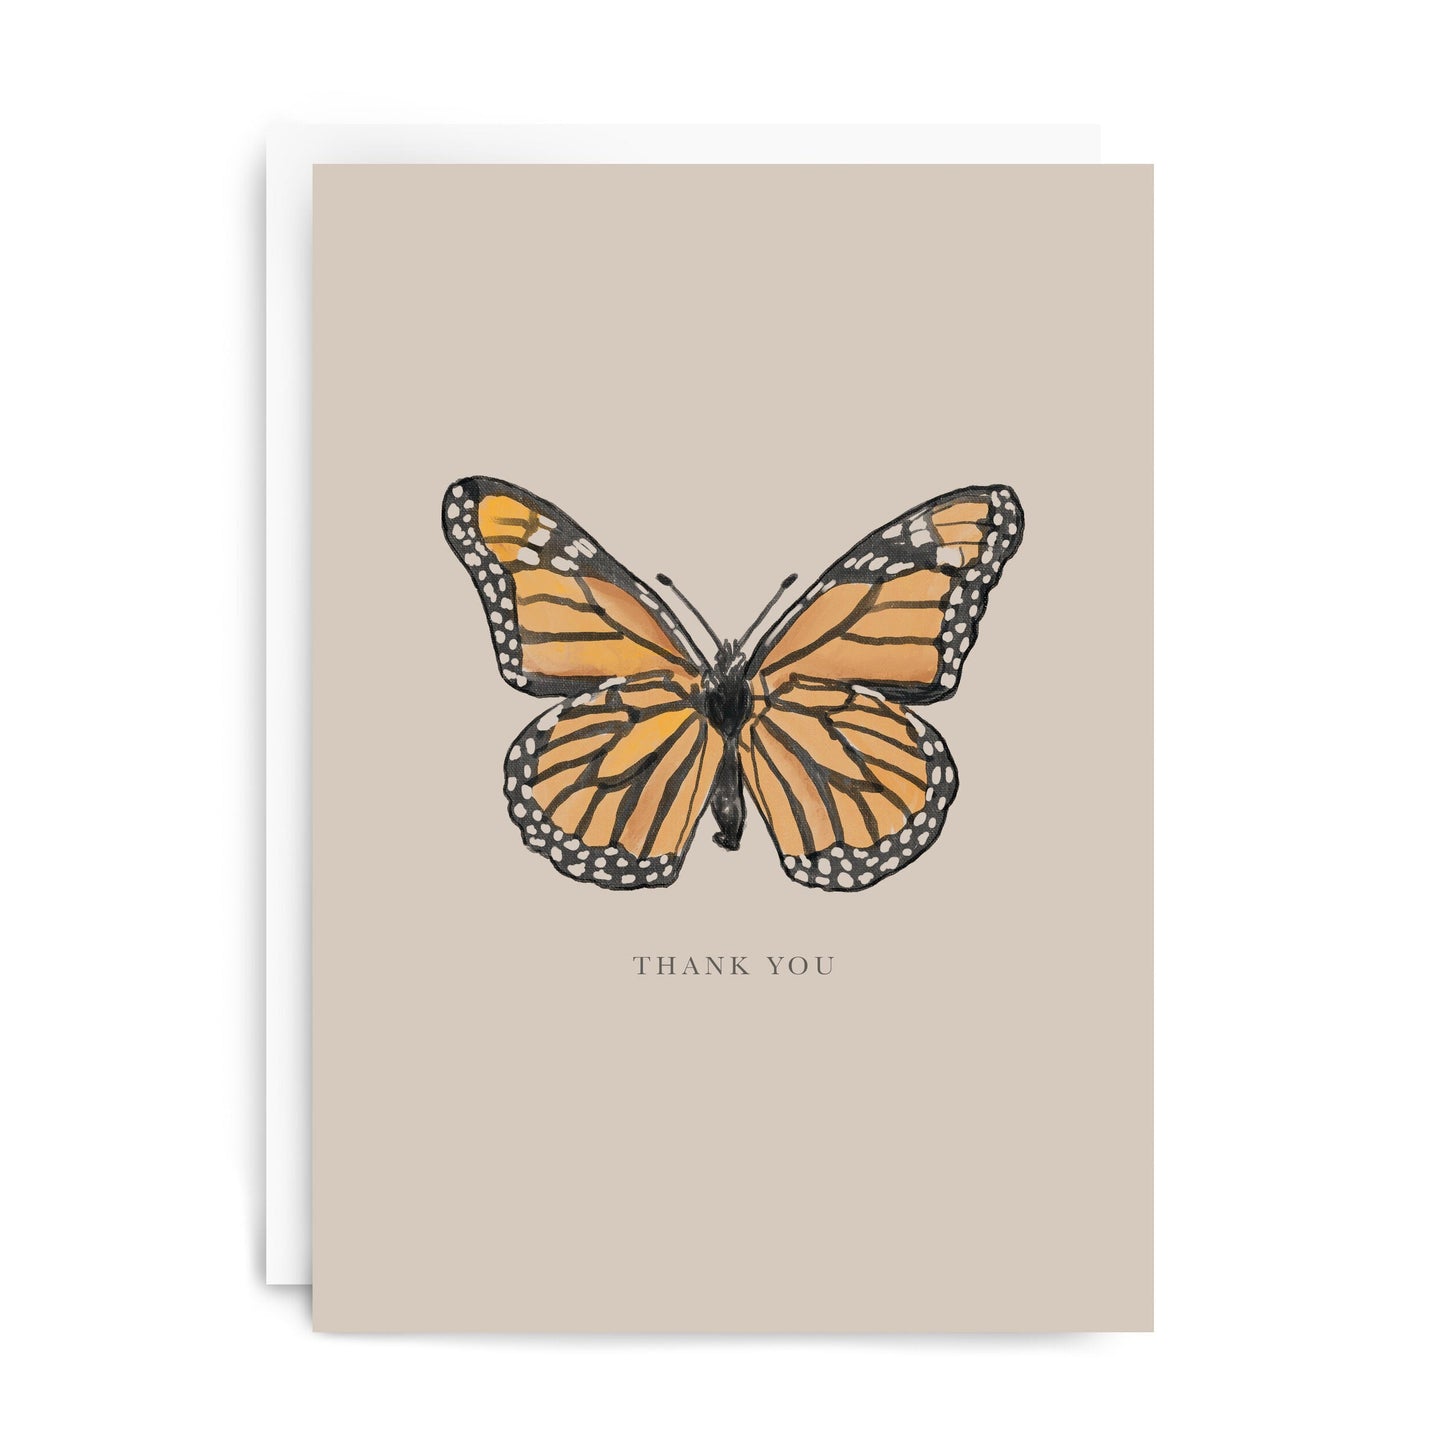 Butterfly "Thank You" Greeting Card